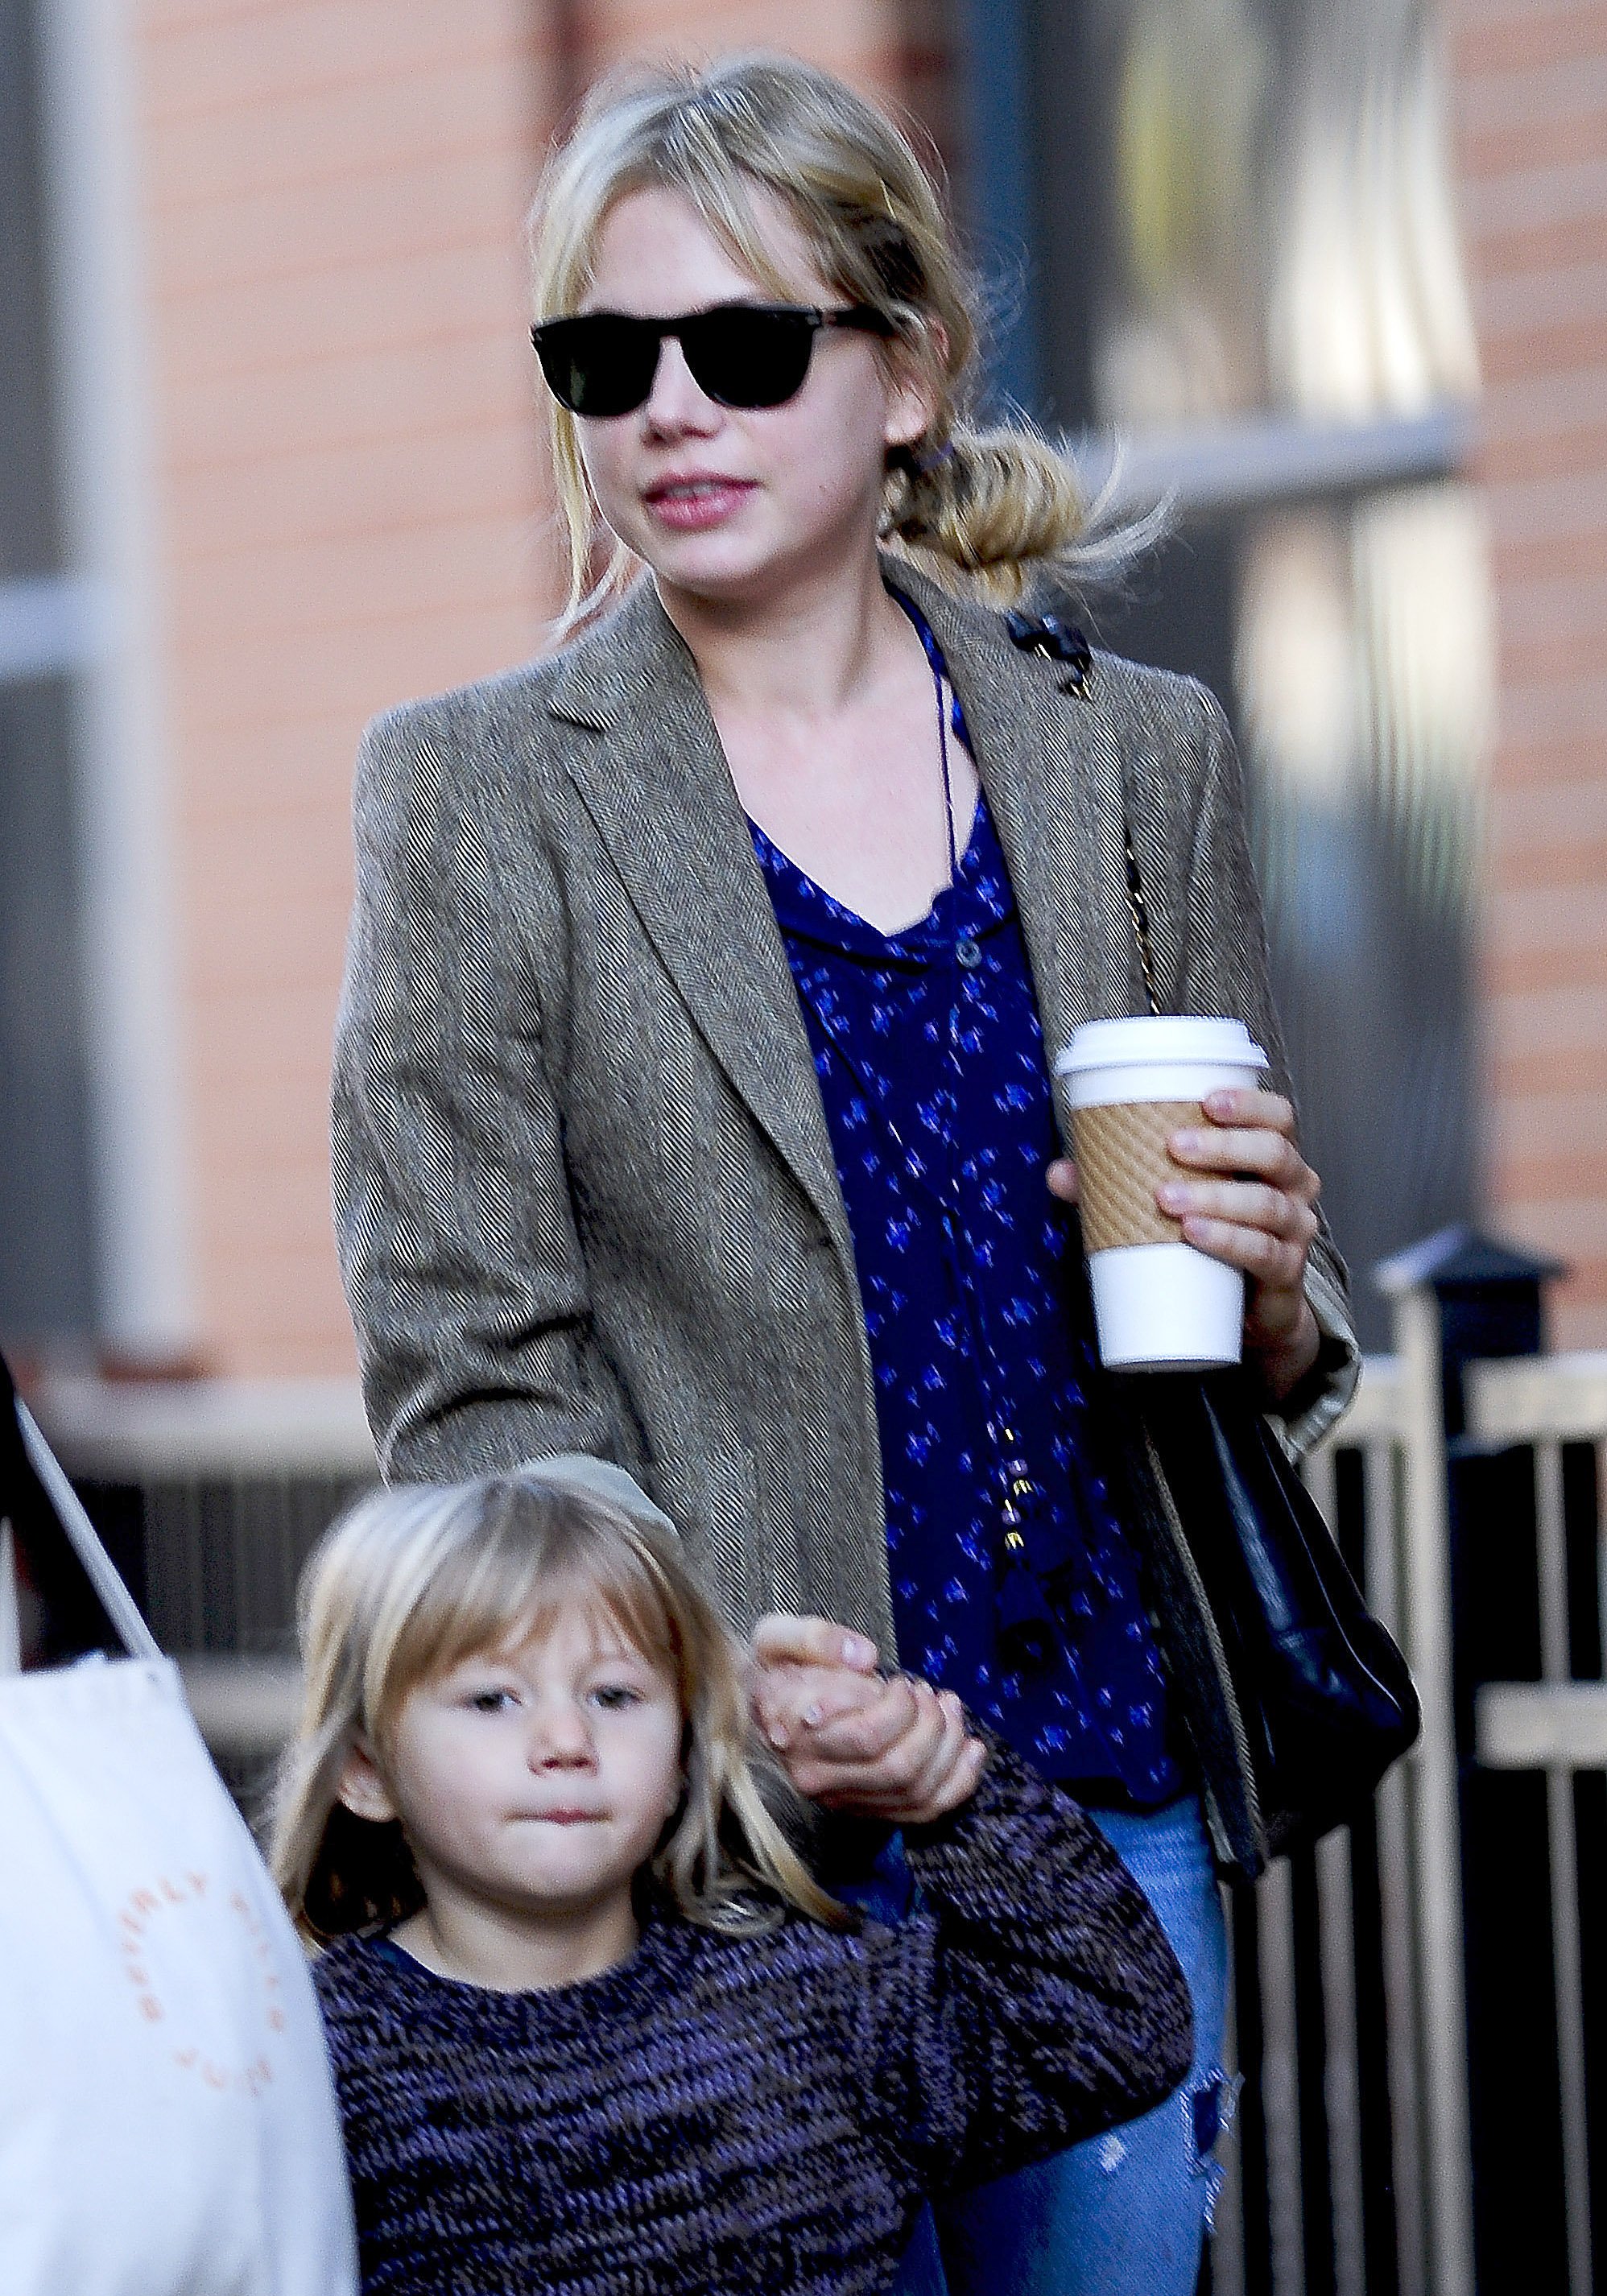 Michelle Williams and her daughter Matilda Ledger walk to their Boerum Hill home in the borough of Brooklyn on October 30, 2009 in New York City ┃Source: Getty Images